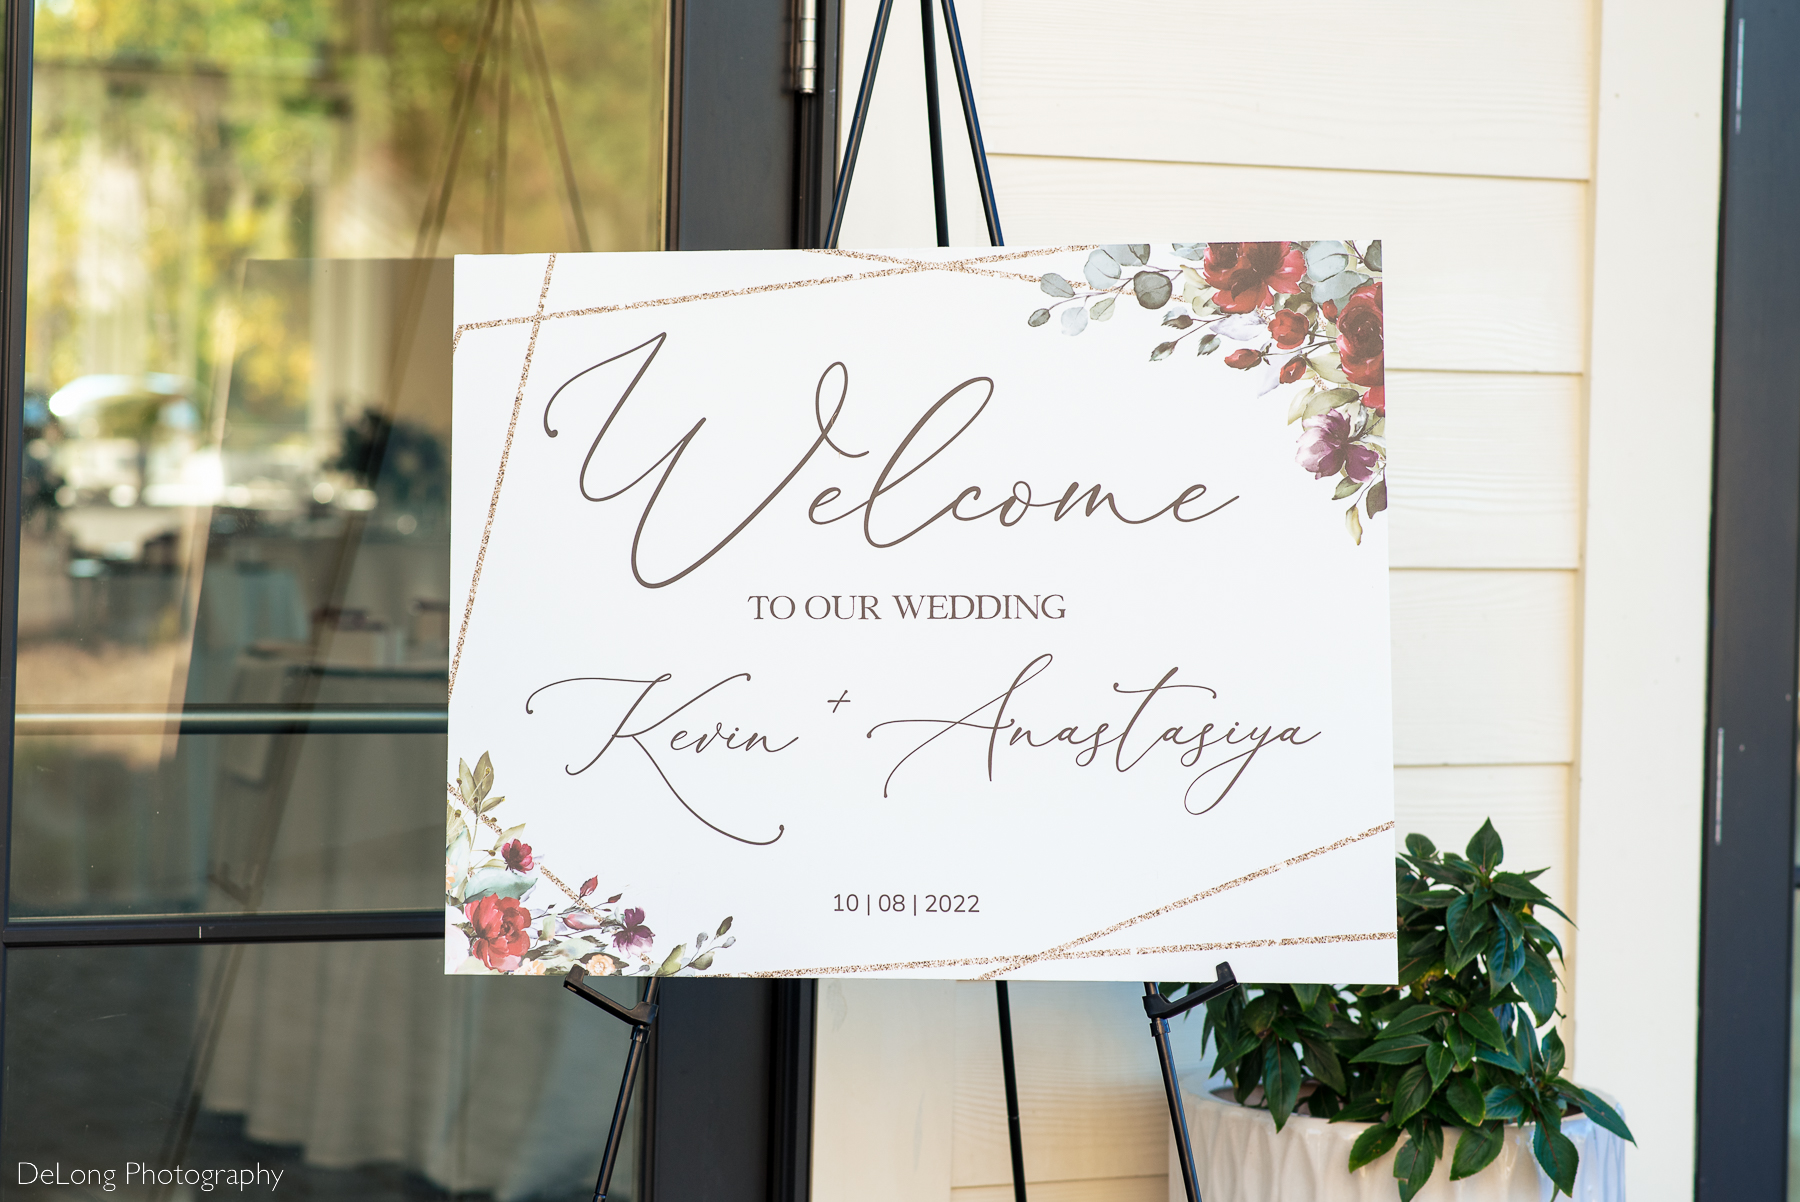 Wedding welcome sign with cursive lettering with red, burgundy, purple, and green florals by Charlotte wedding photographers DeLong Photography